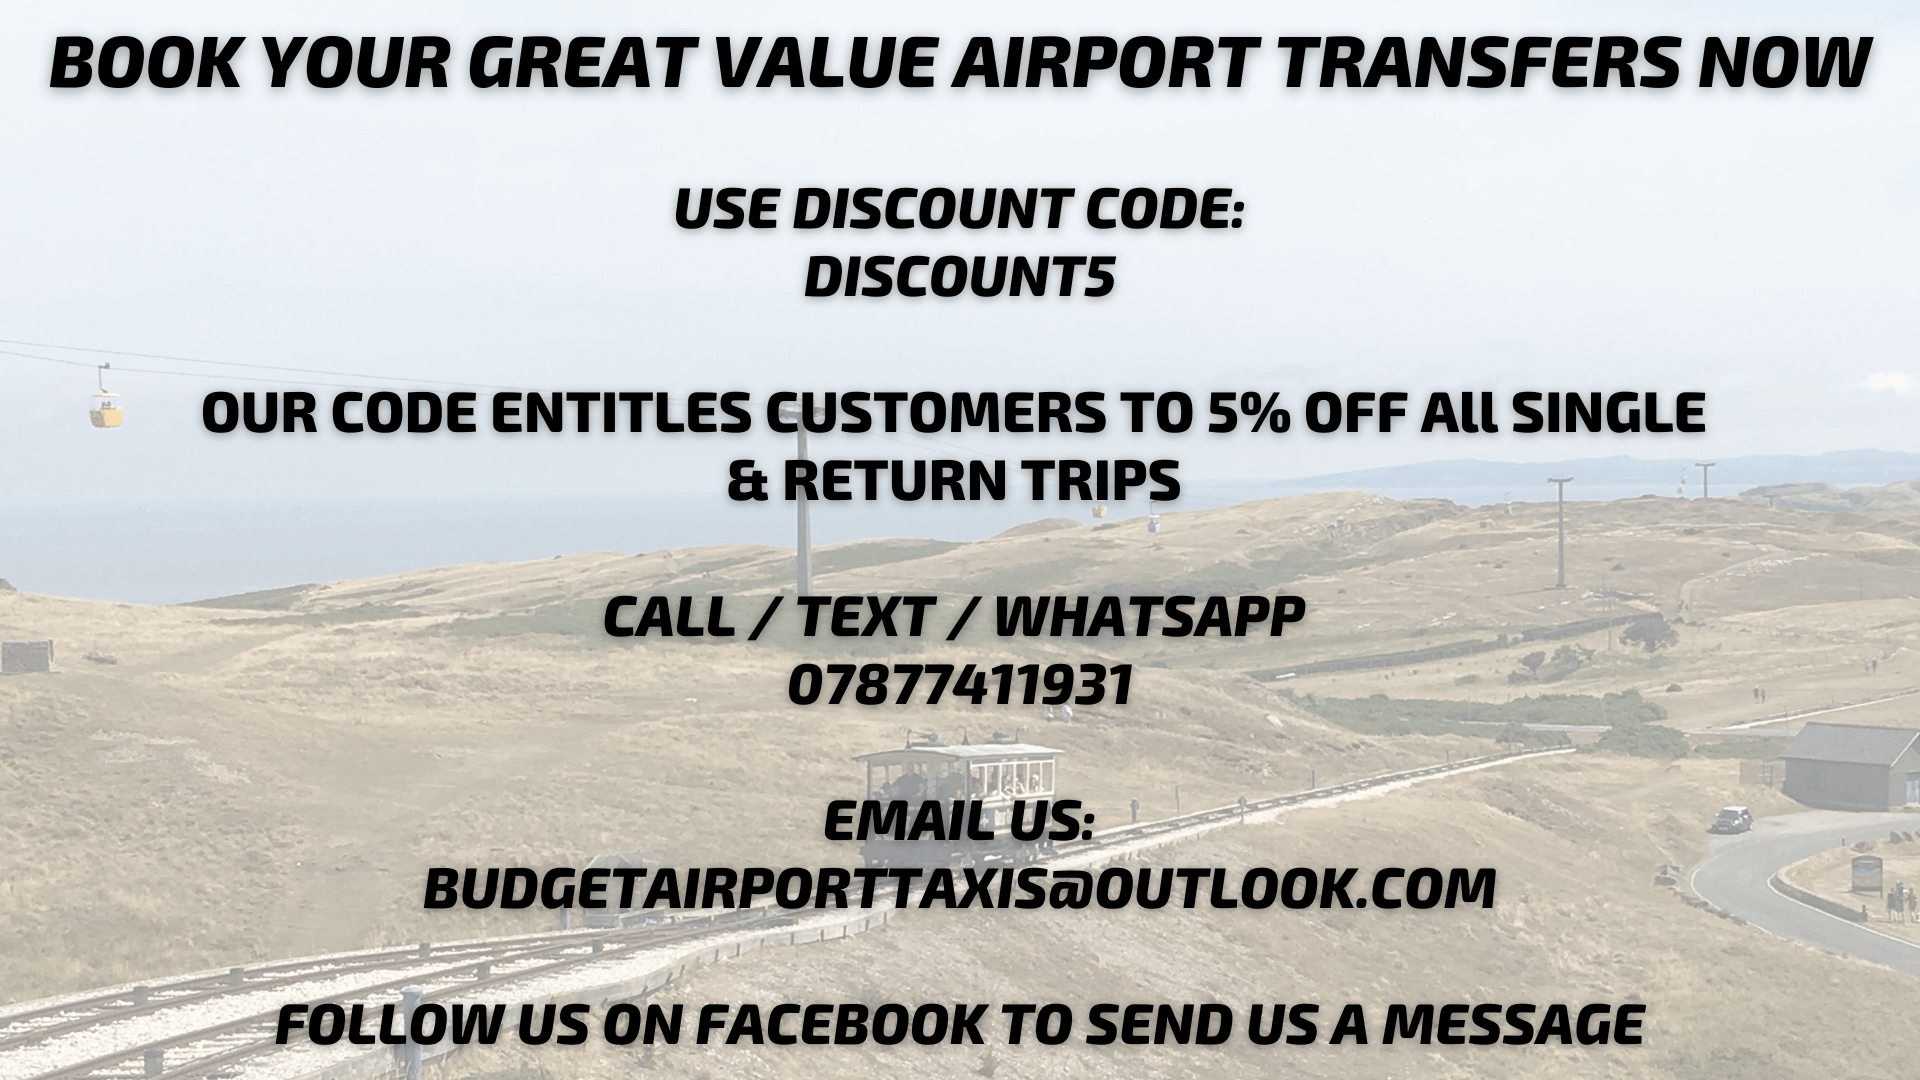 ardrossan glasgow airport taxi transfer 5% discount